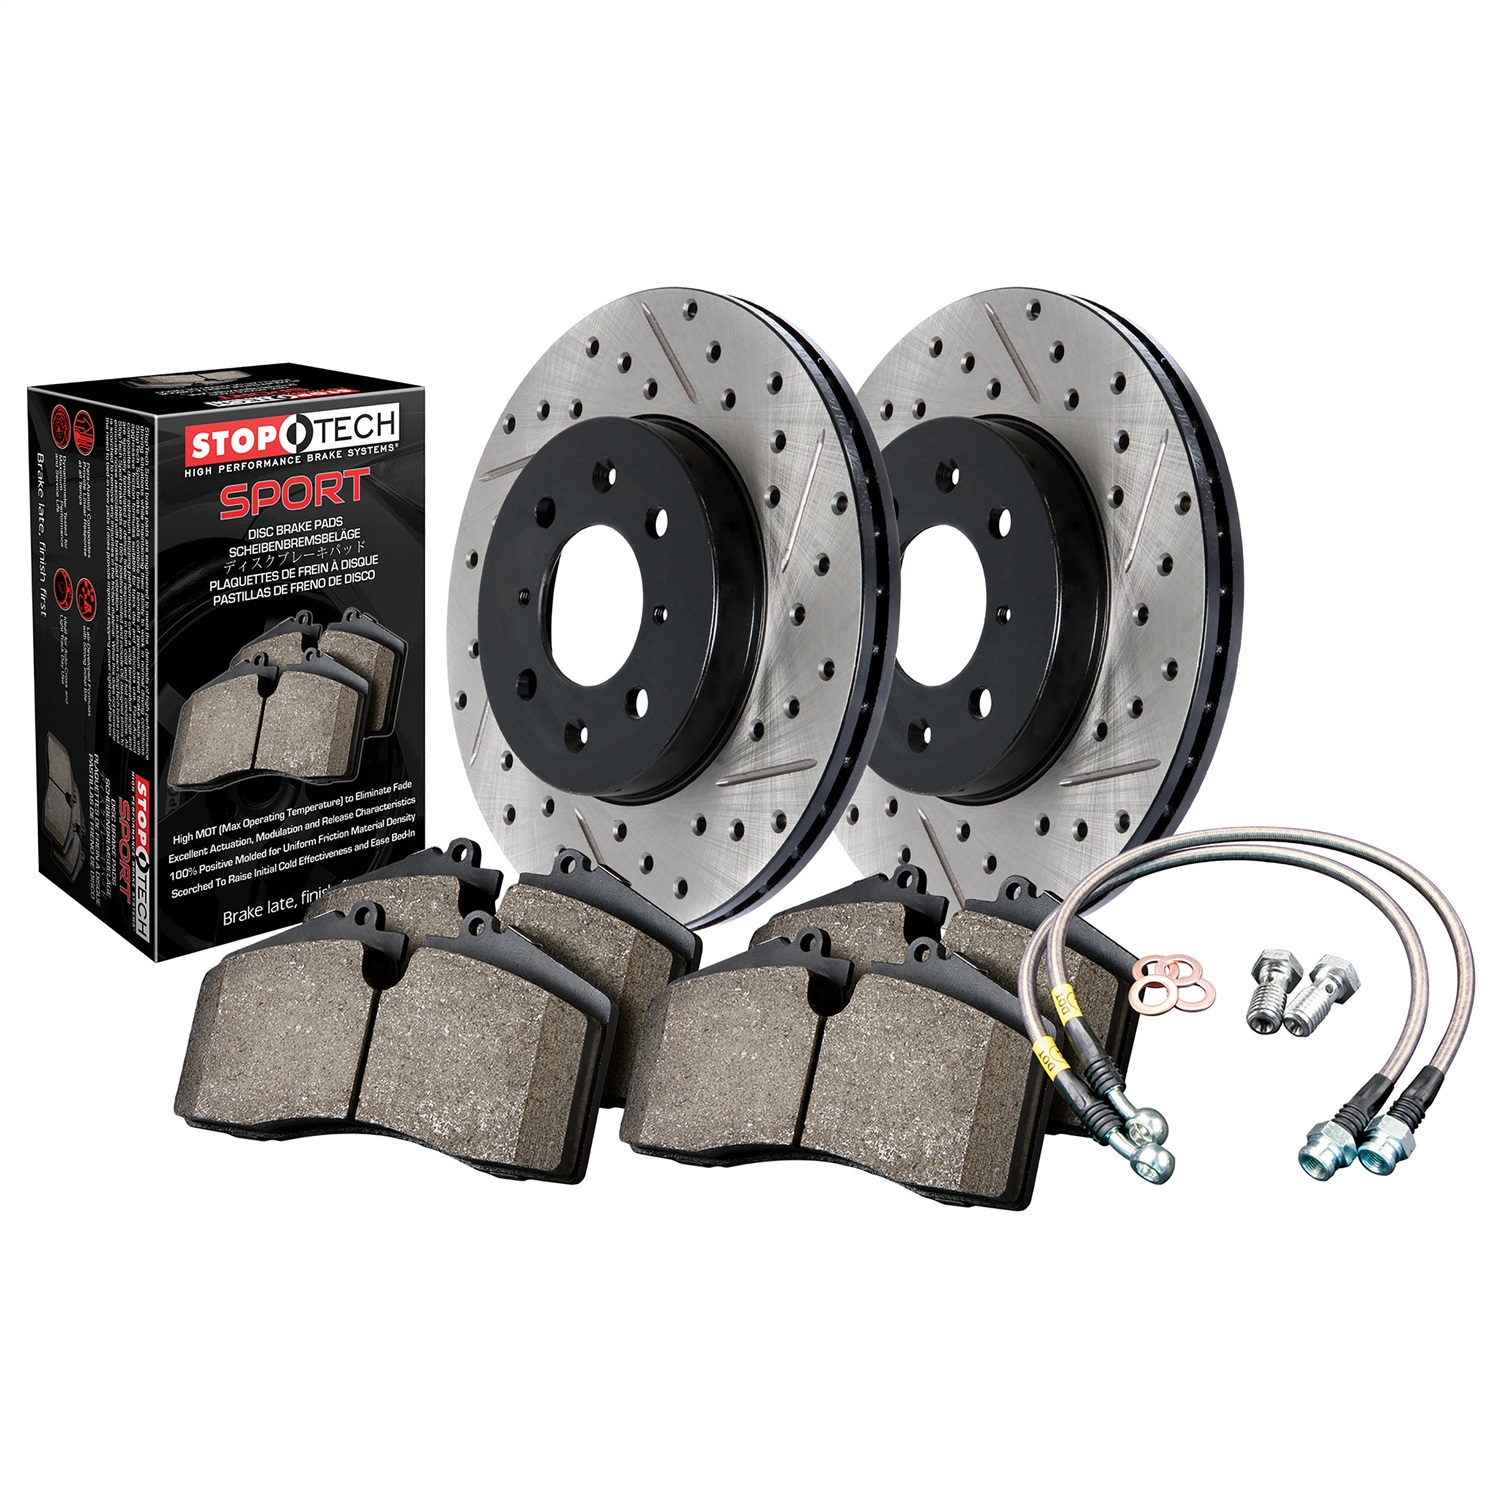 StopTech 978.62013F Sport Disc Brake Kit w/Cross-Drilled And Slotted Rotors